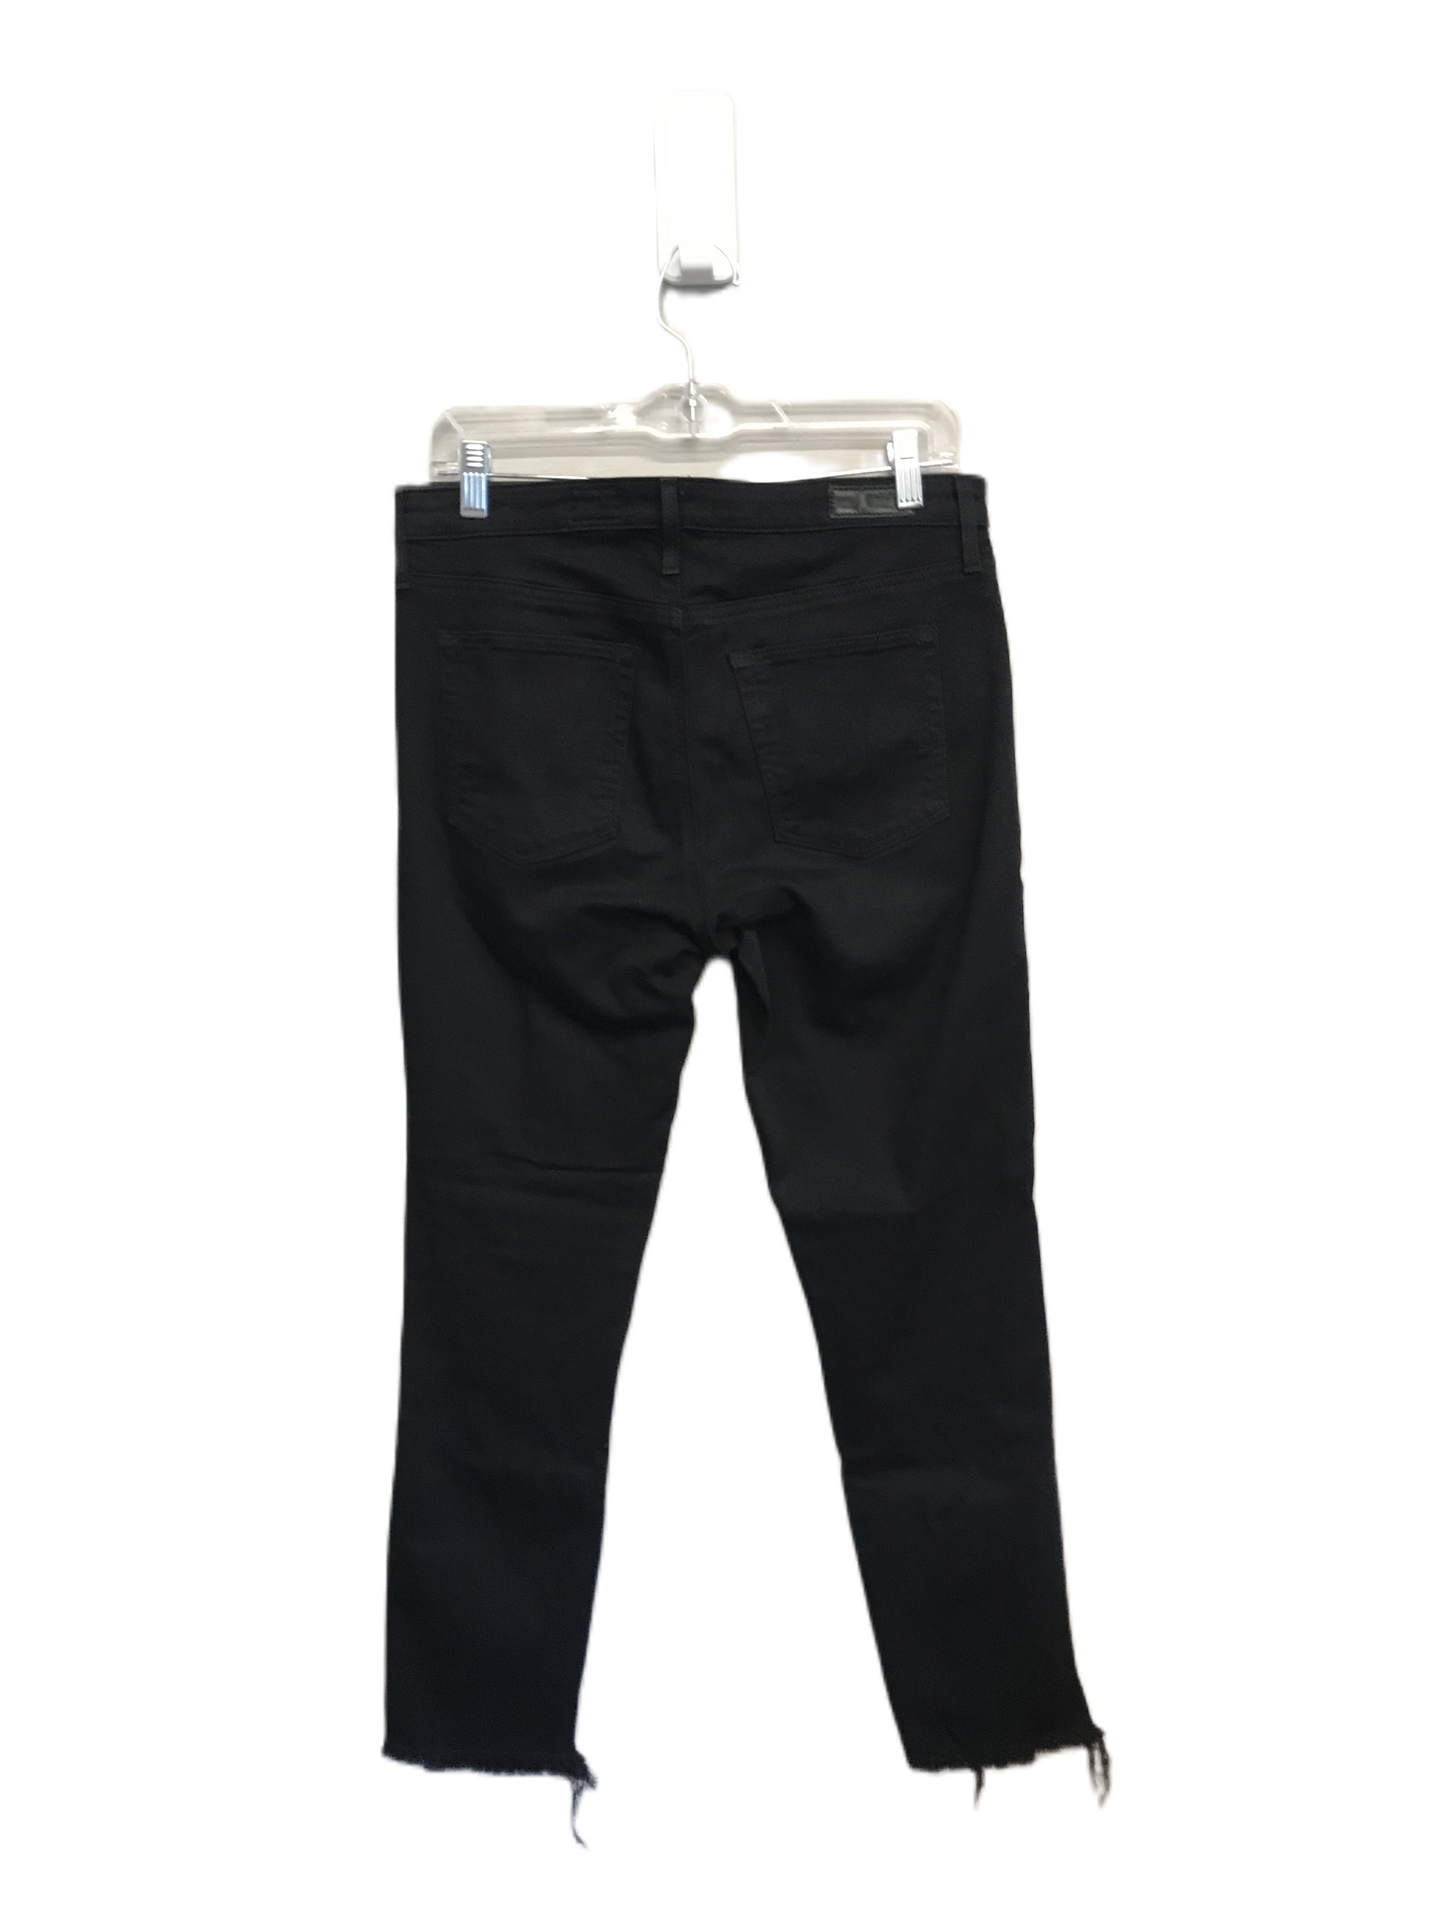 Black Jeans Cropped By Adriano Goldschmied, Size: 8